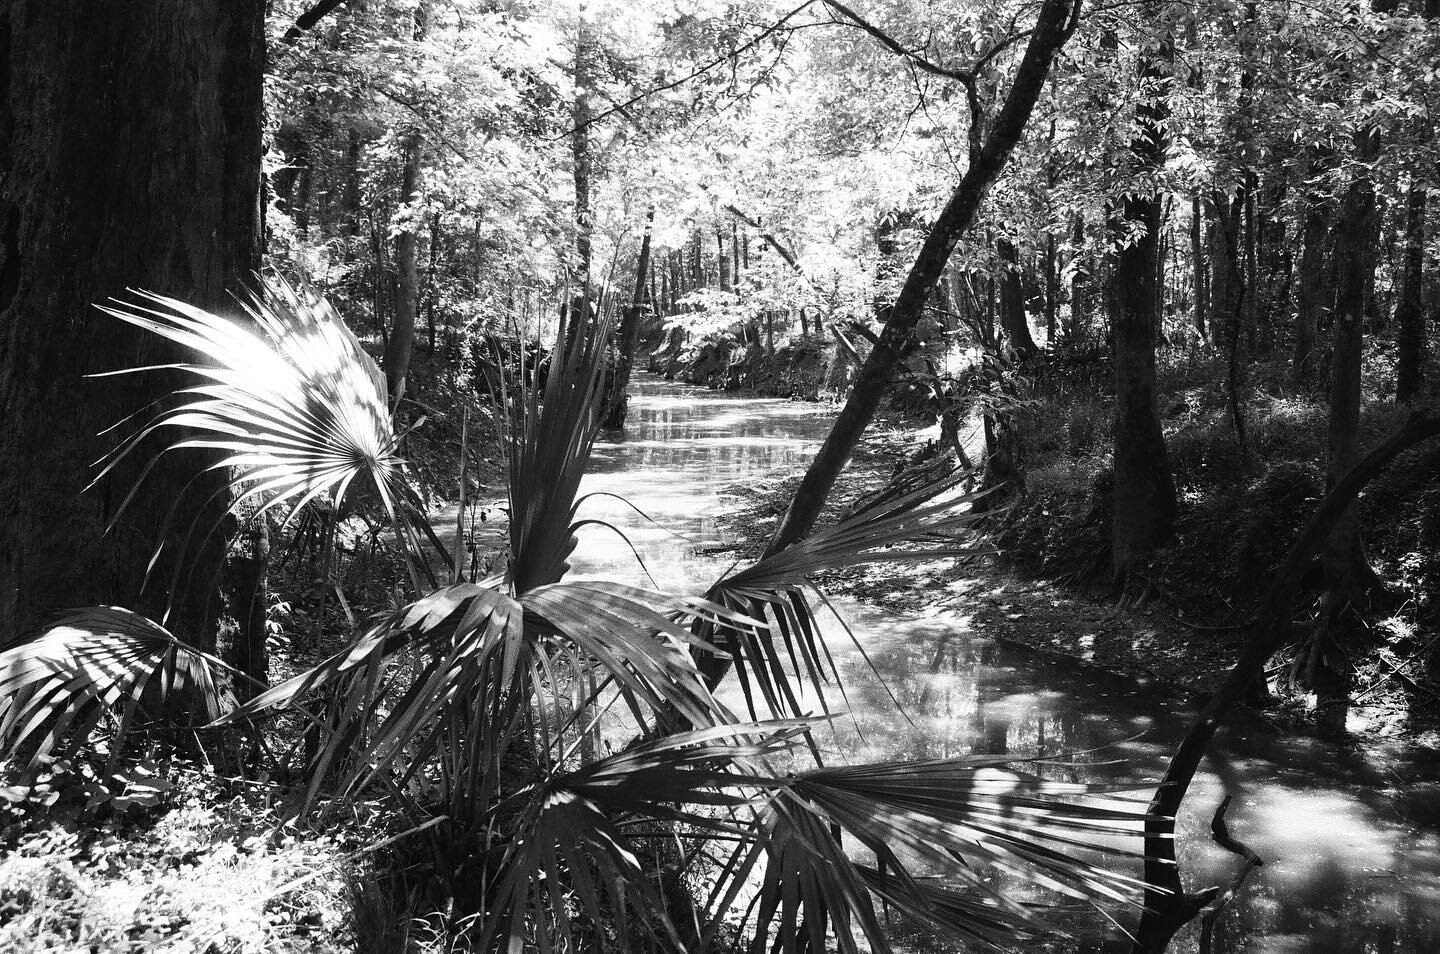 Morning walk at the Nature Station on black and white #film before things really heat up. The palmettos already look like they&rsquo;re sweating 🌿🌞